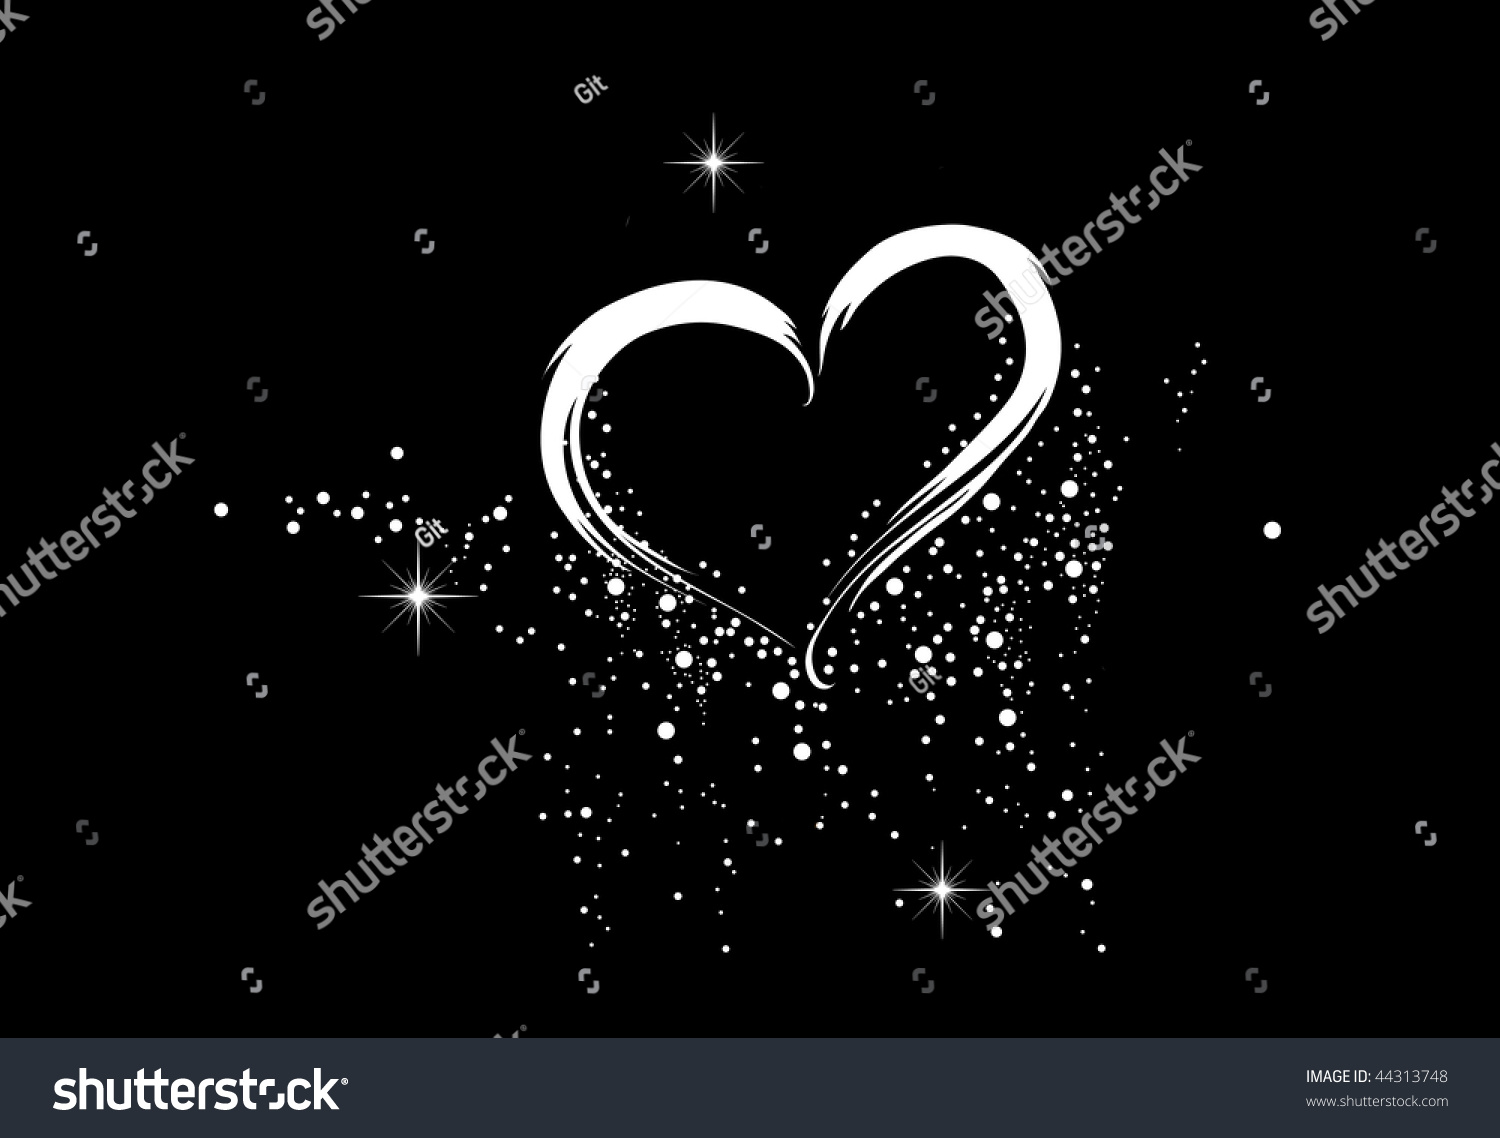 Simple White Heart Black Background